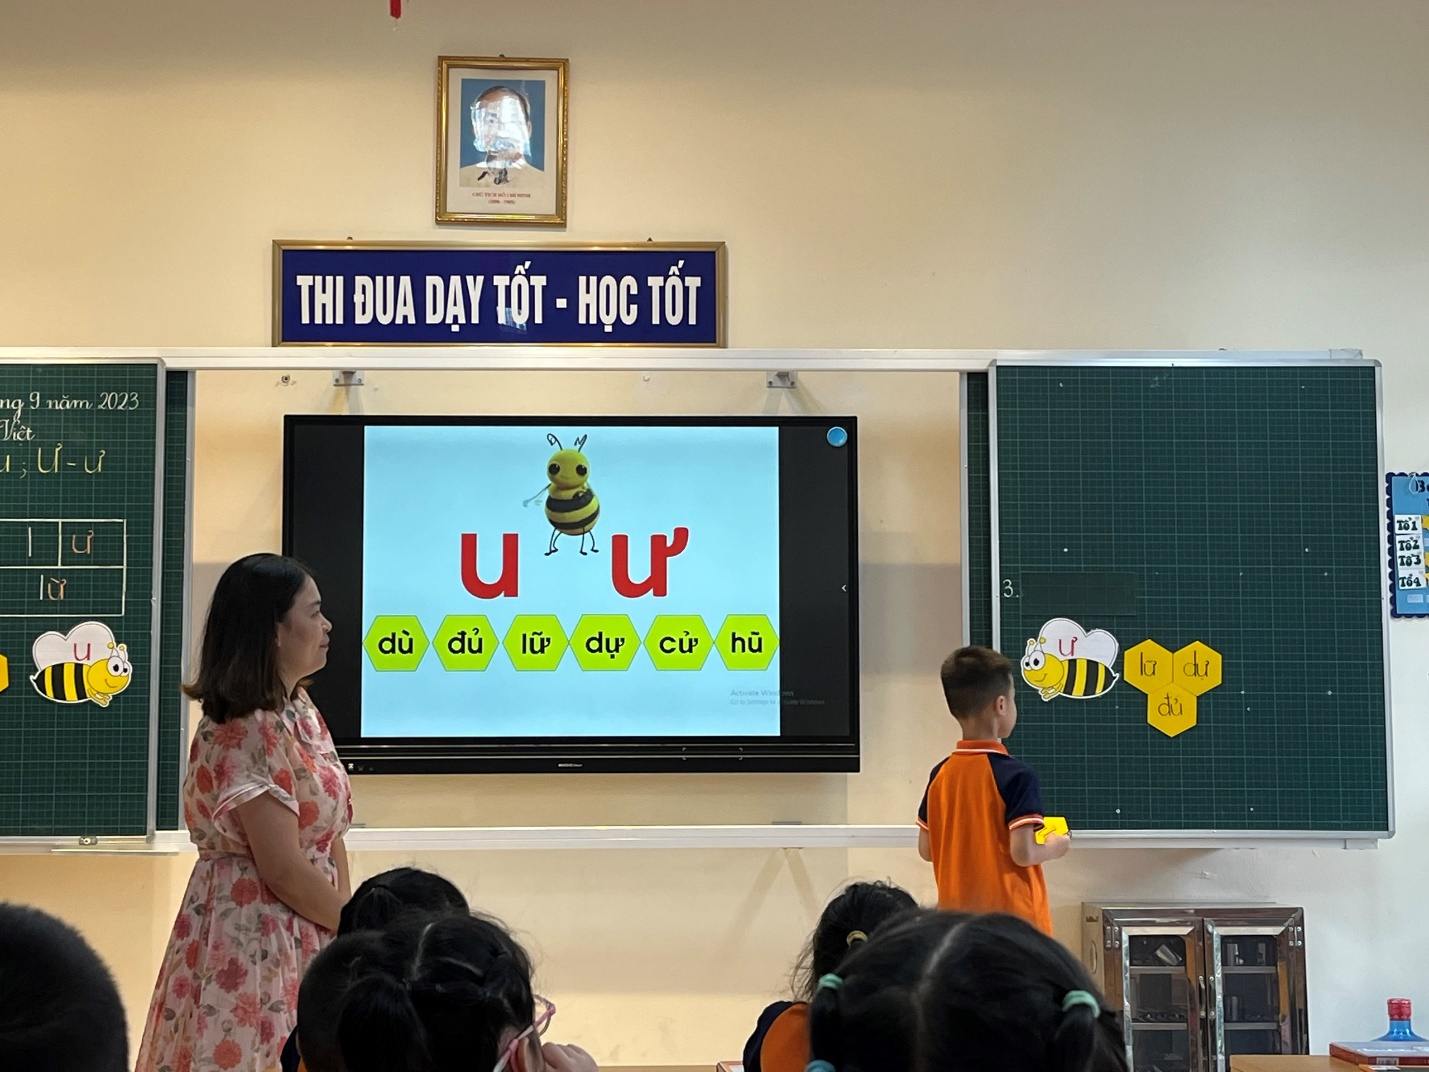 A person standing in front of a screen

Description automatically generated